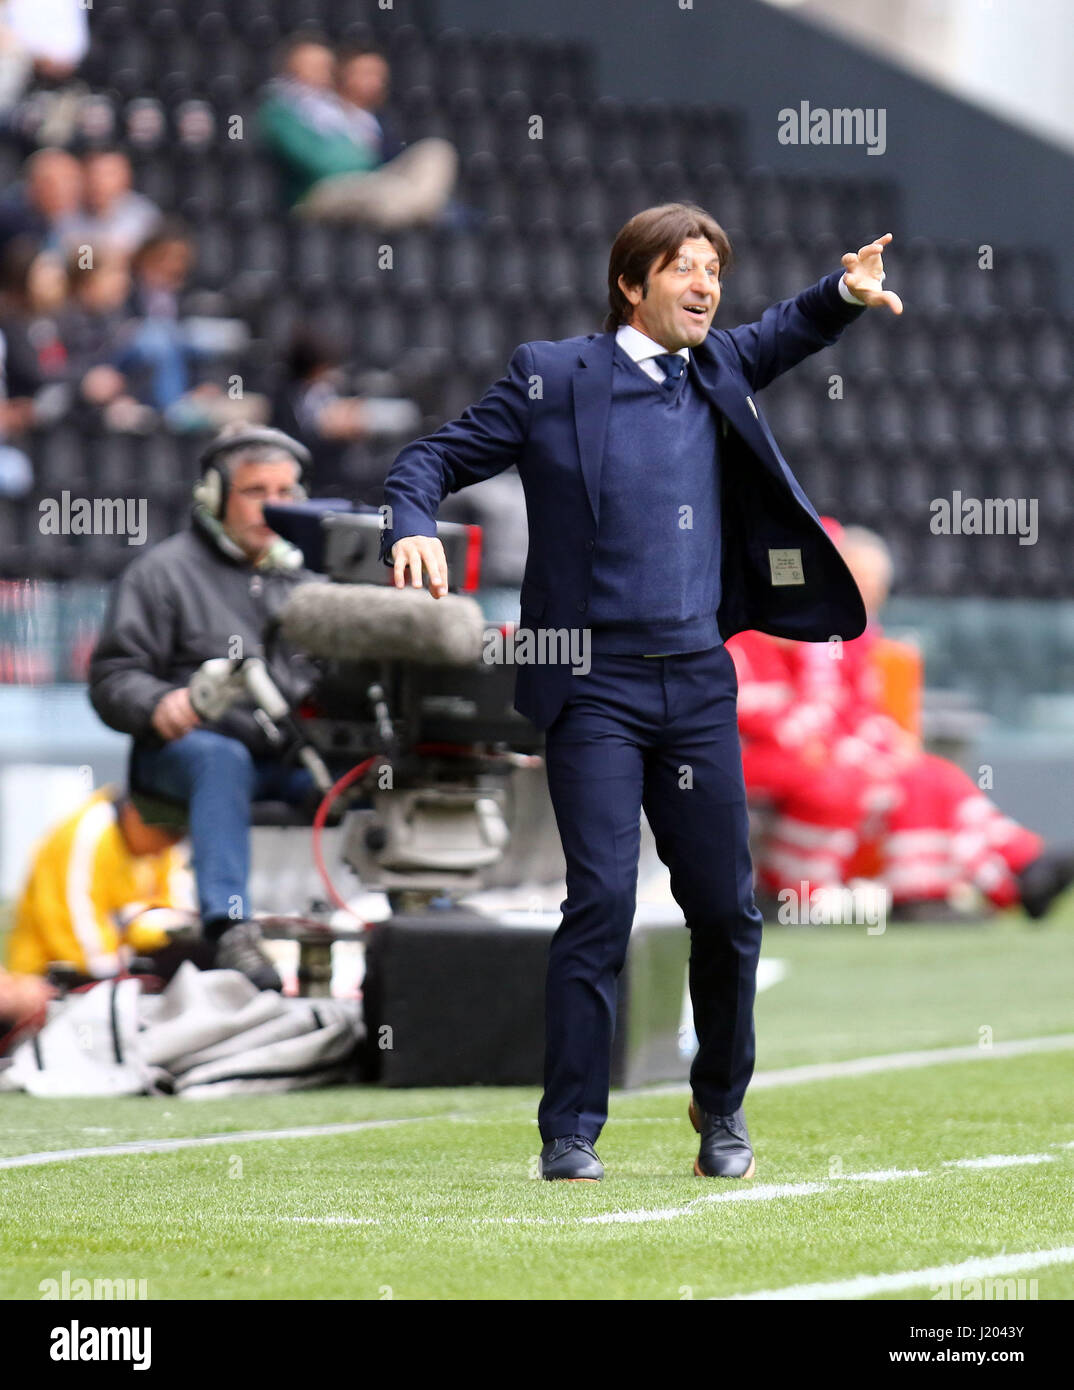 Udine, Italy. 23rd Apr, 2017. Cagliari's Head Coach Massimo Rastelli gestures during the Serie A football match between Udinese Calcio v Cagliari Calcio at Dacia Arena Stadium on 23th April, 2017. Credit: Andrea Spinelli/Alamy Live News Stock Photo